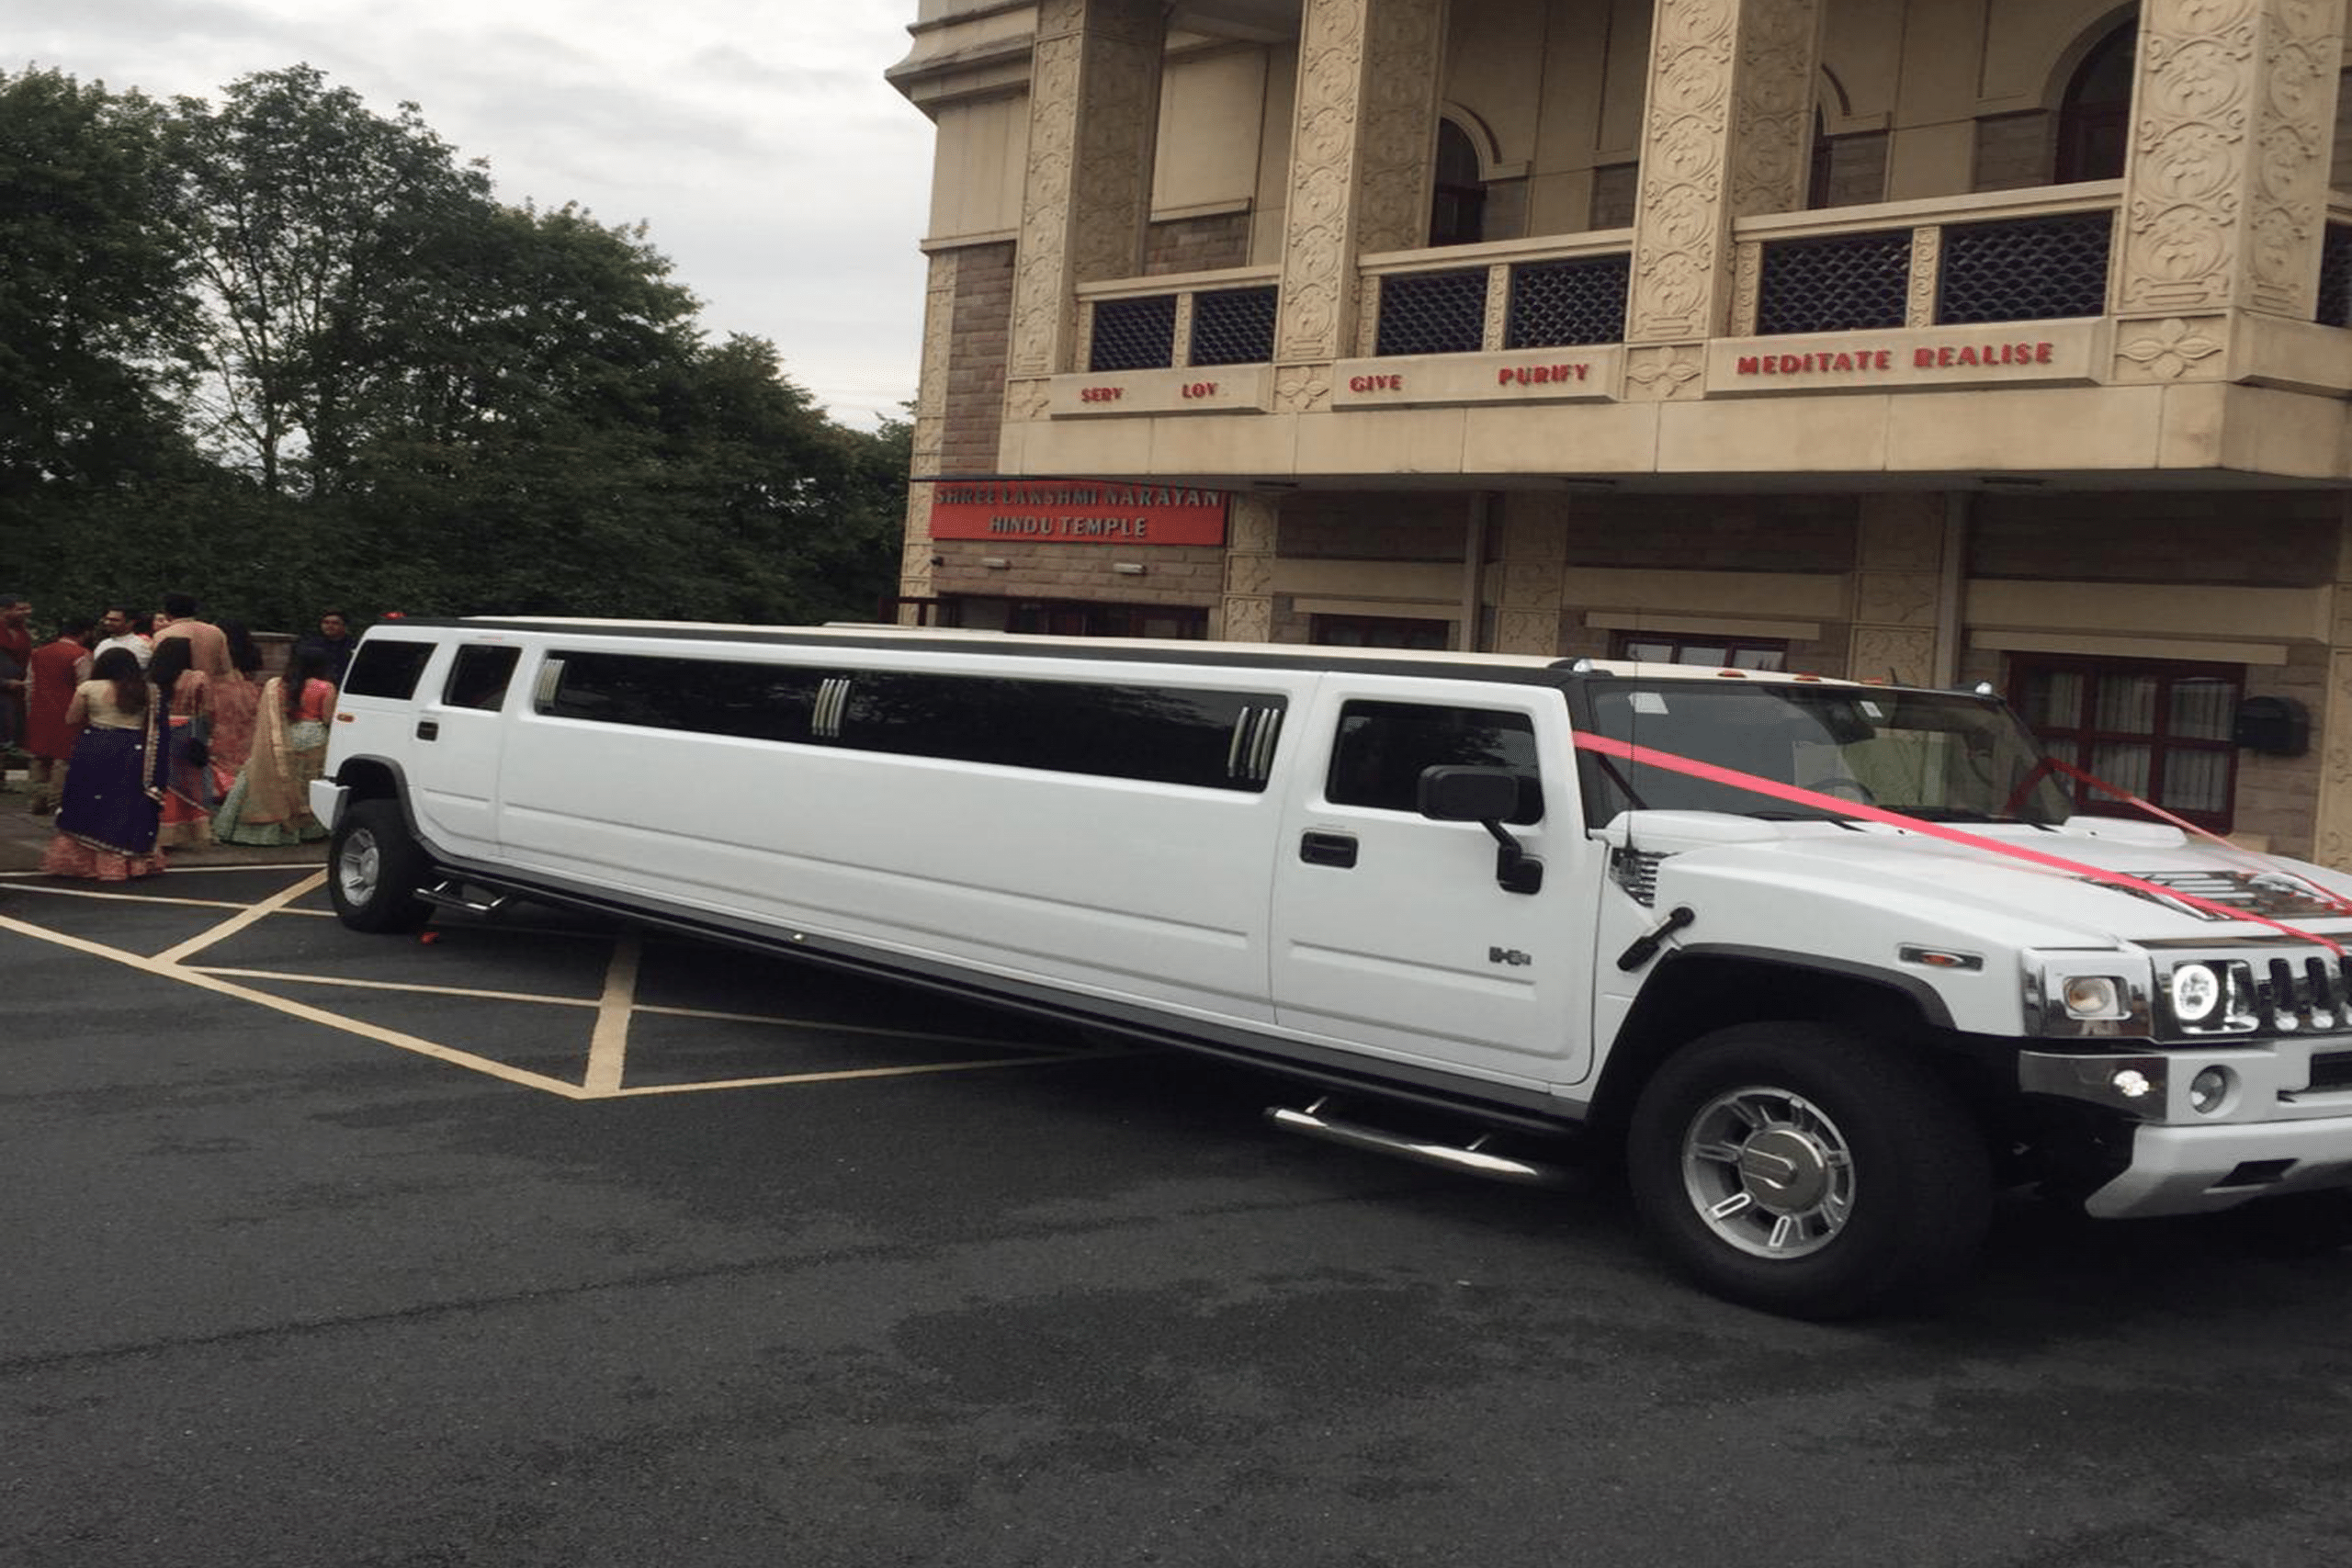 Get the Best Wedding Limo Hire Service in Yorkshire with LIMO & SUPERCAR HIRE